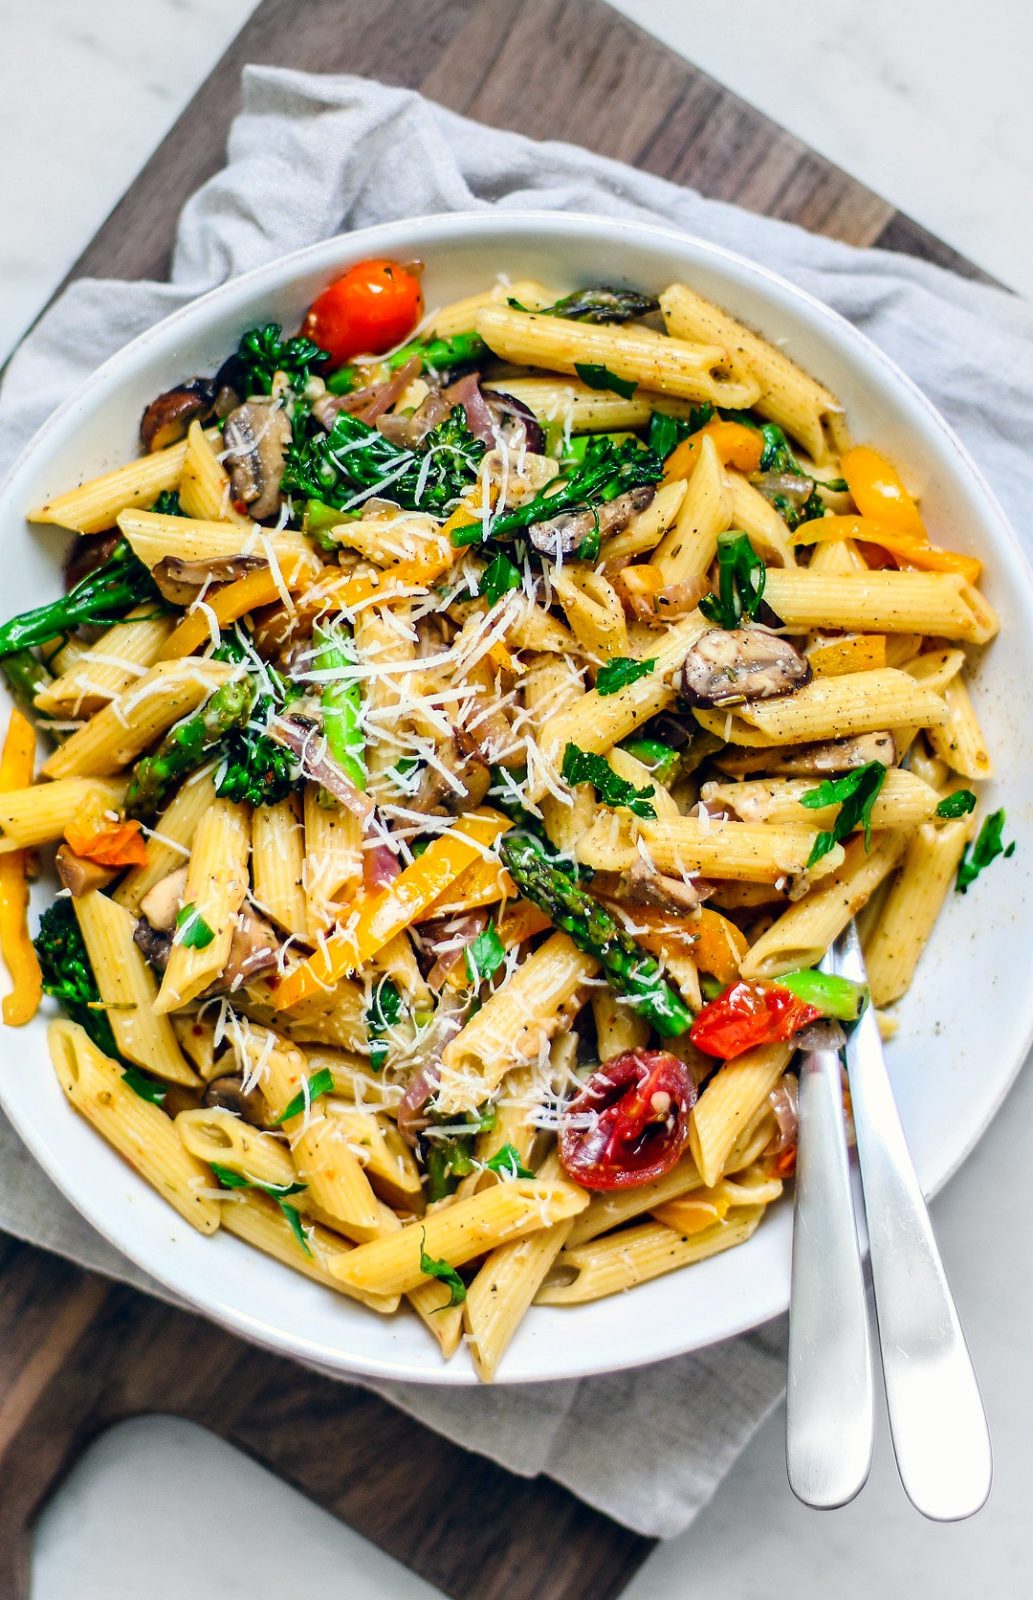 A big colorful serving bowl full of pasta and vegetables.